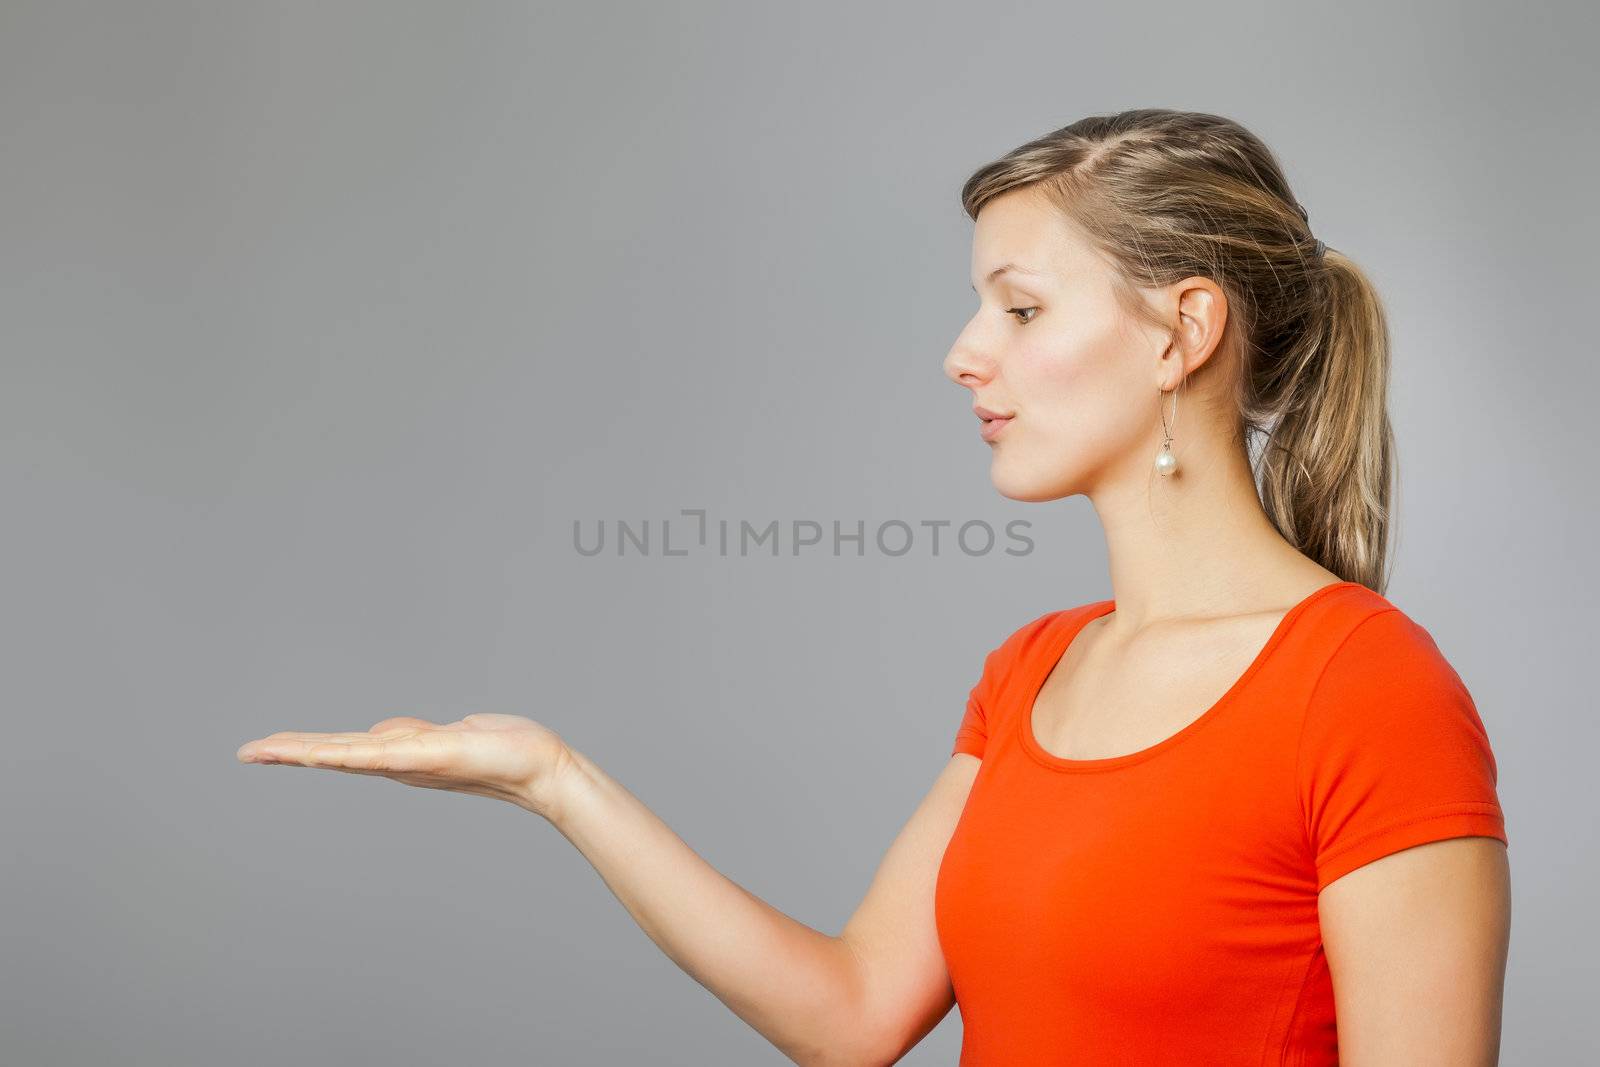 An image of a nice young woman presenting something